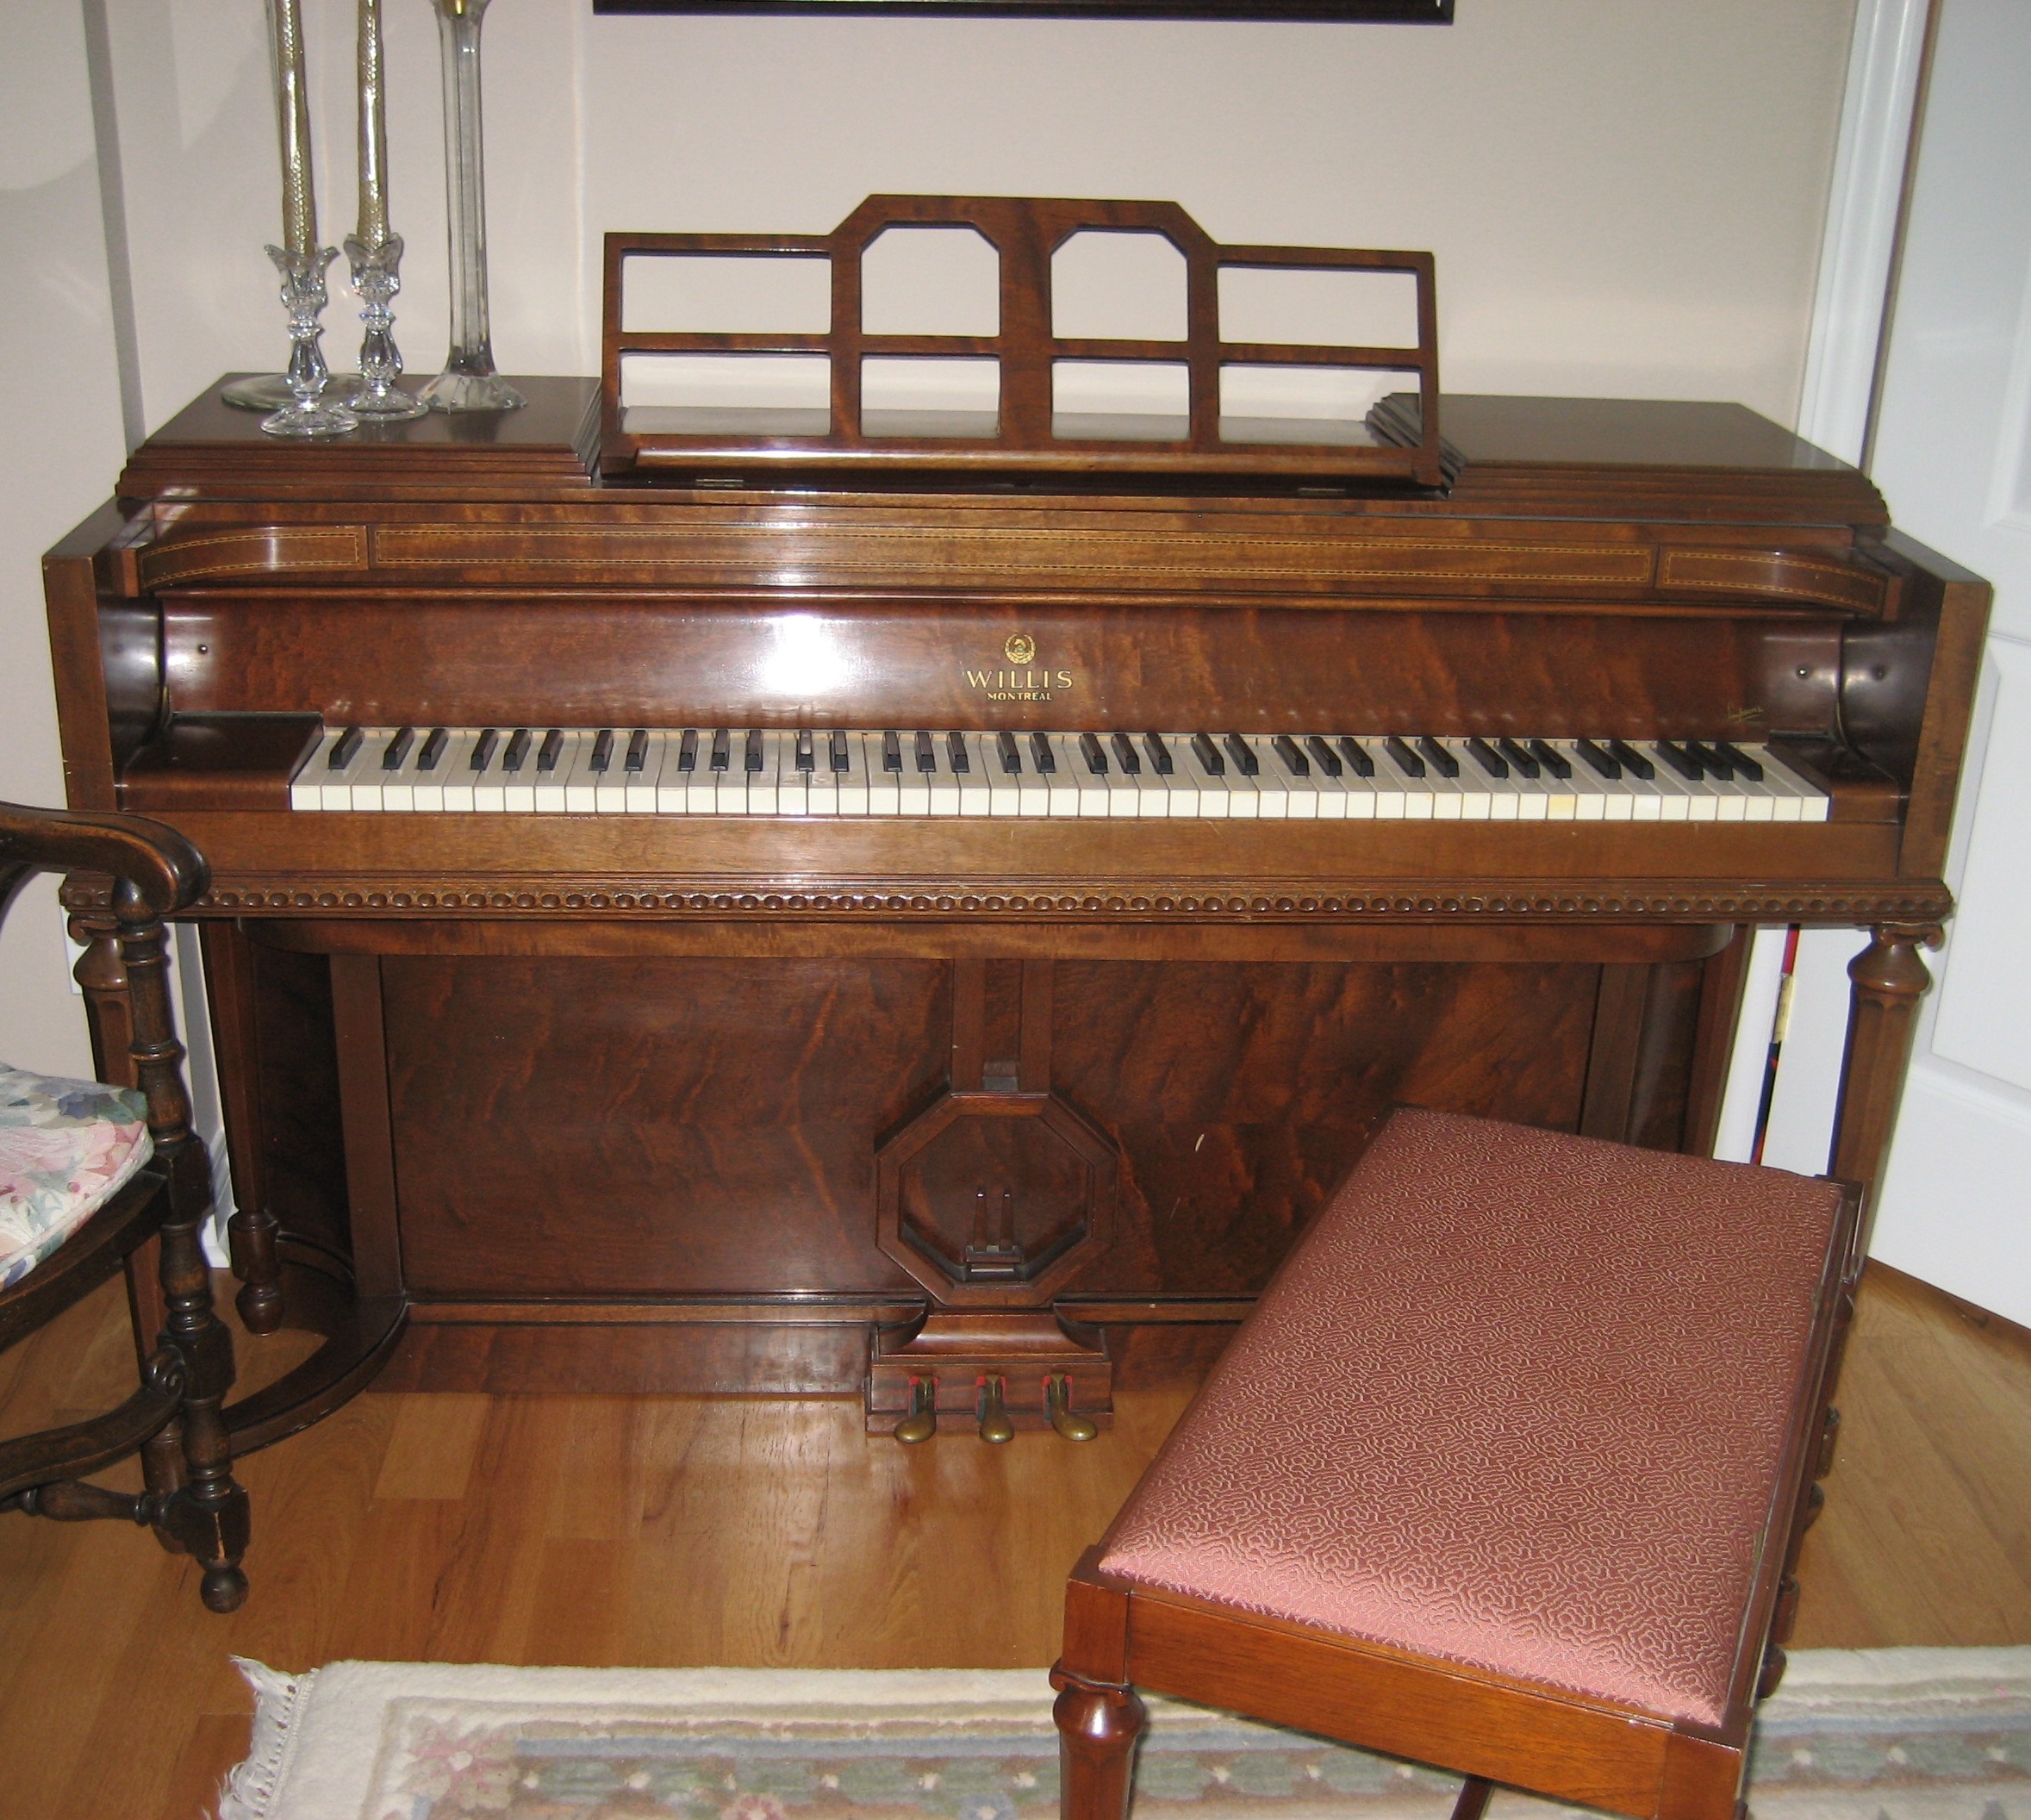 Willis Montreal Piano Serial Numbers